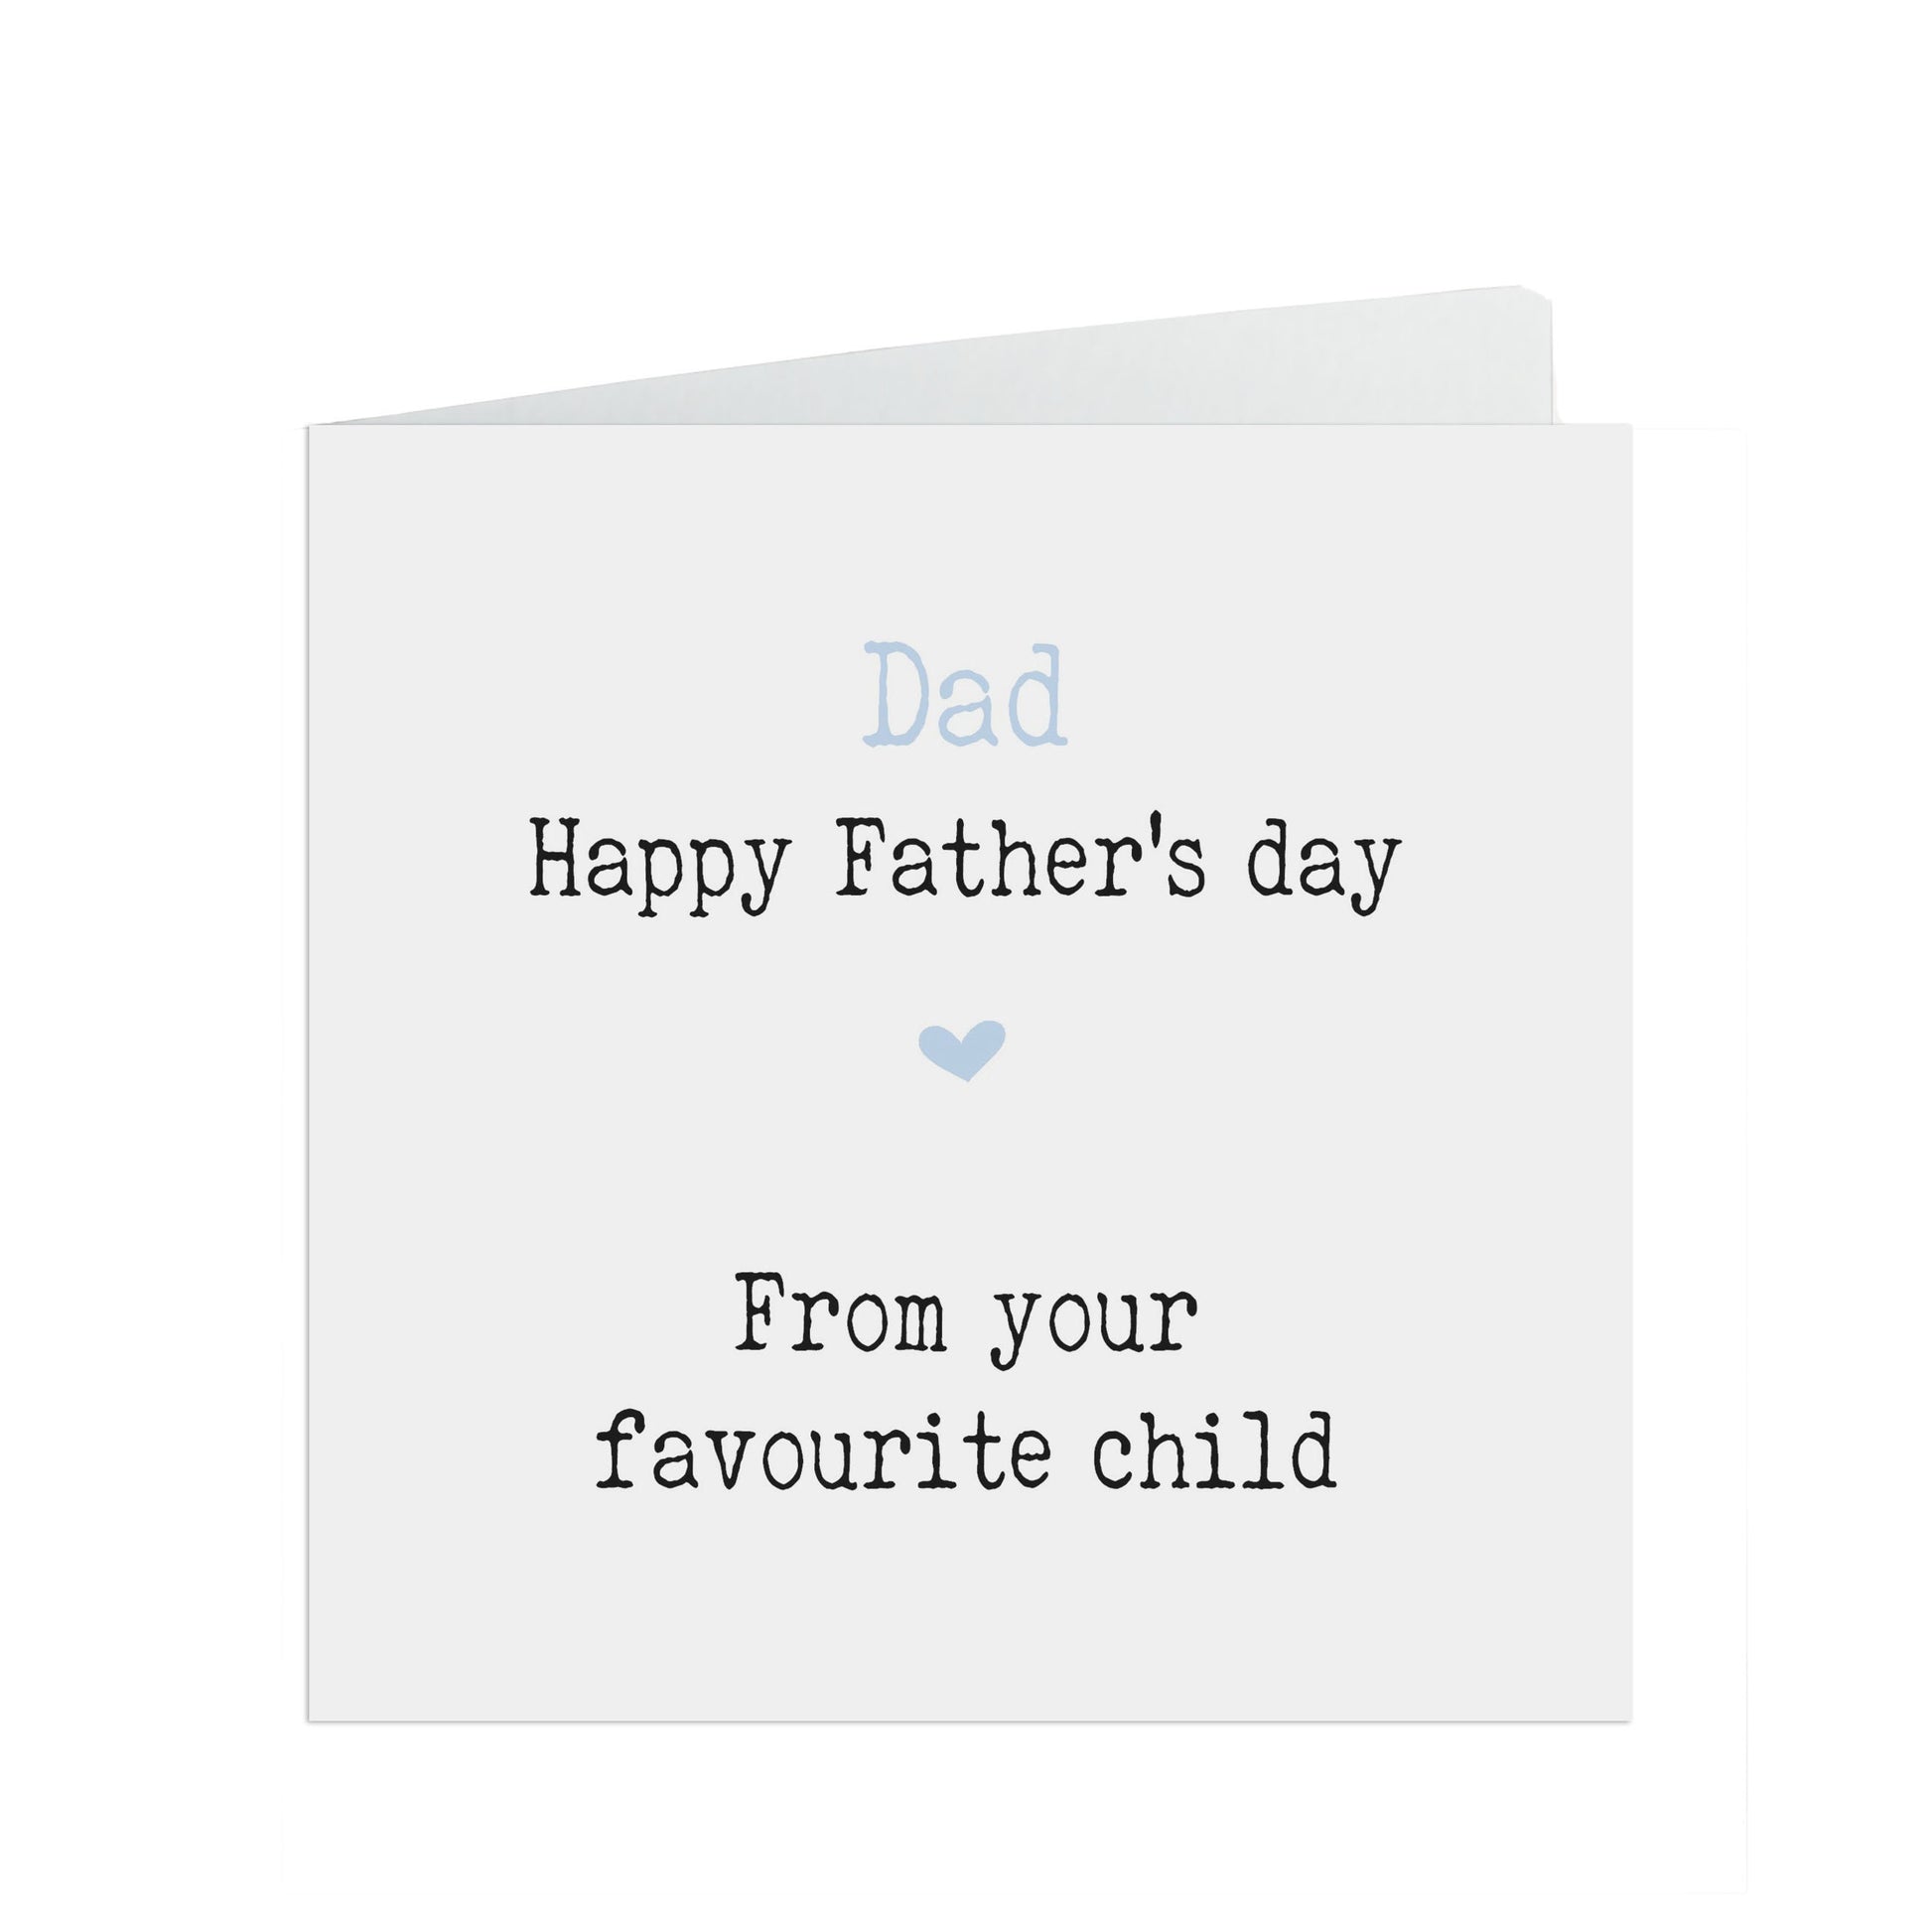  Happy Father's Day From Your Favourite Child, Funny Fathers Day Card by PMPRINTED 